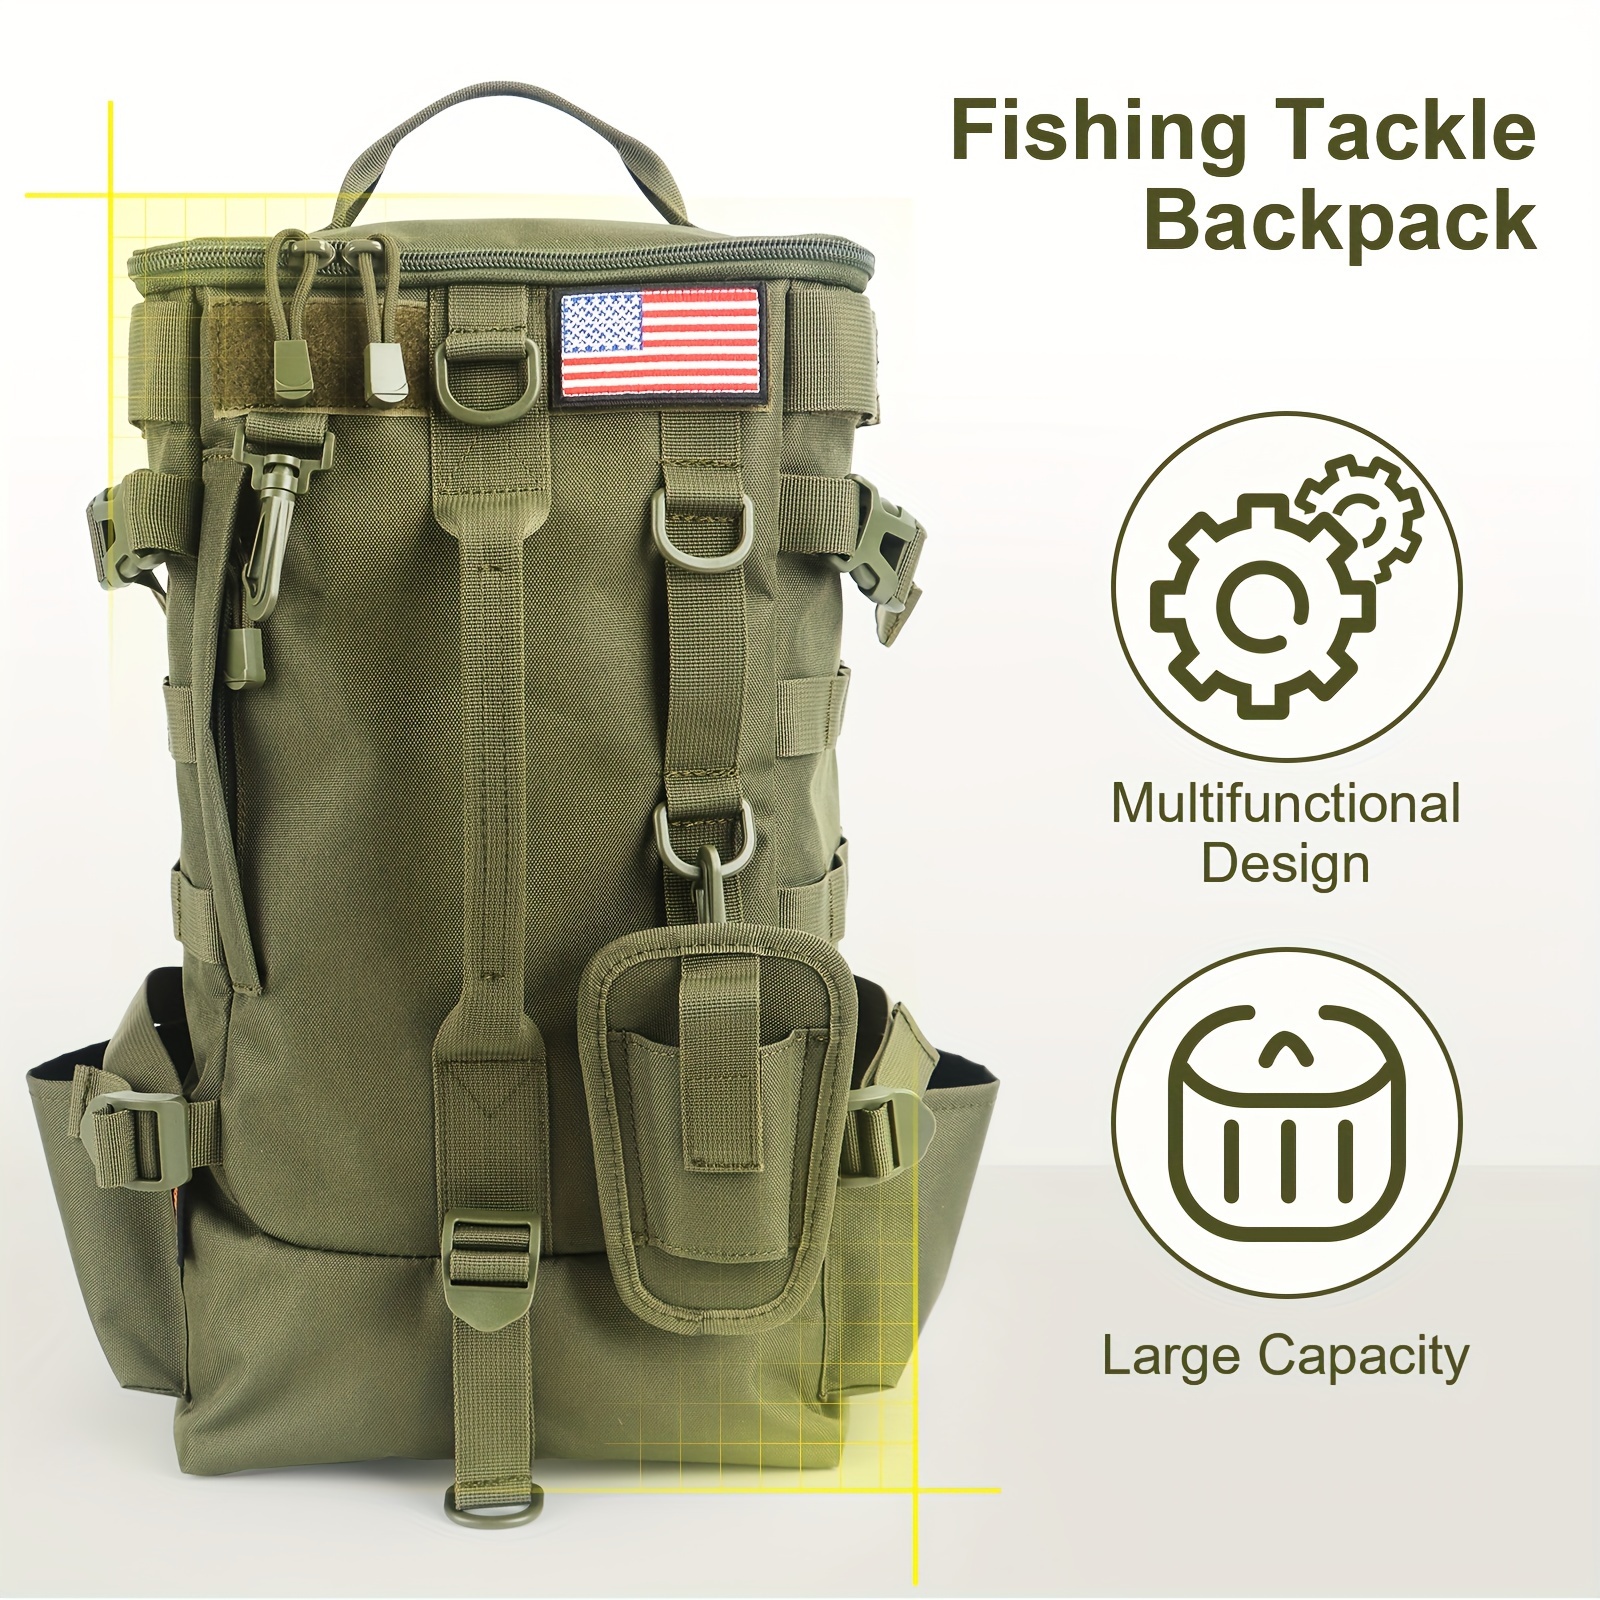 YVLEEN Fishing Tackle Backpack - Outdoor Large Fishing Tackle